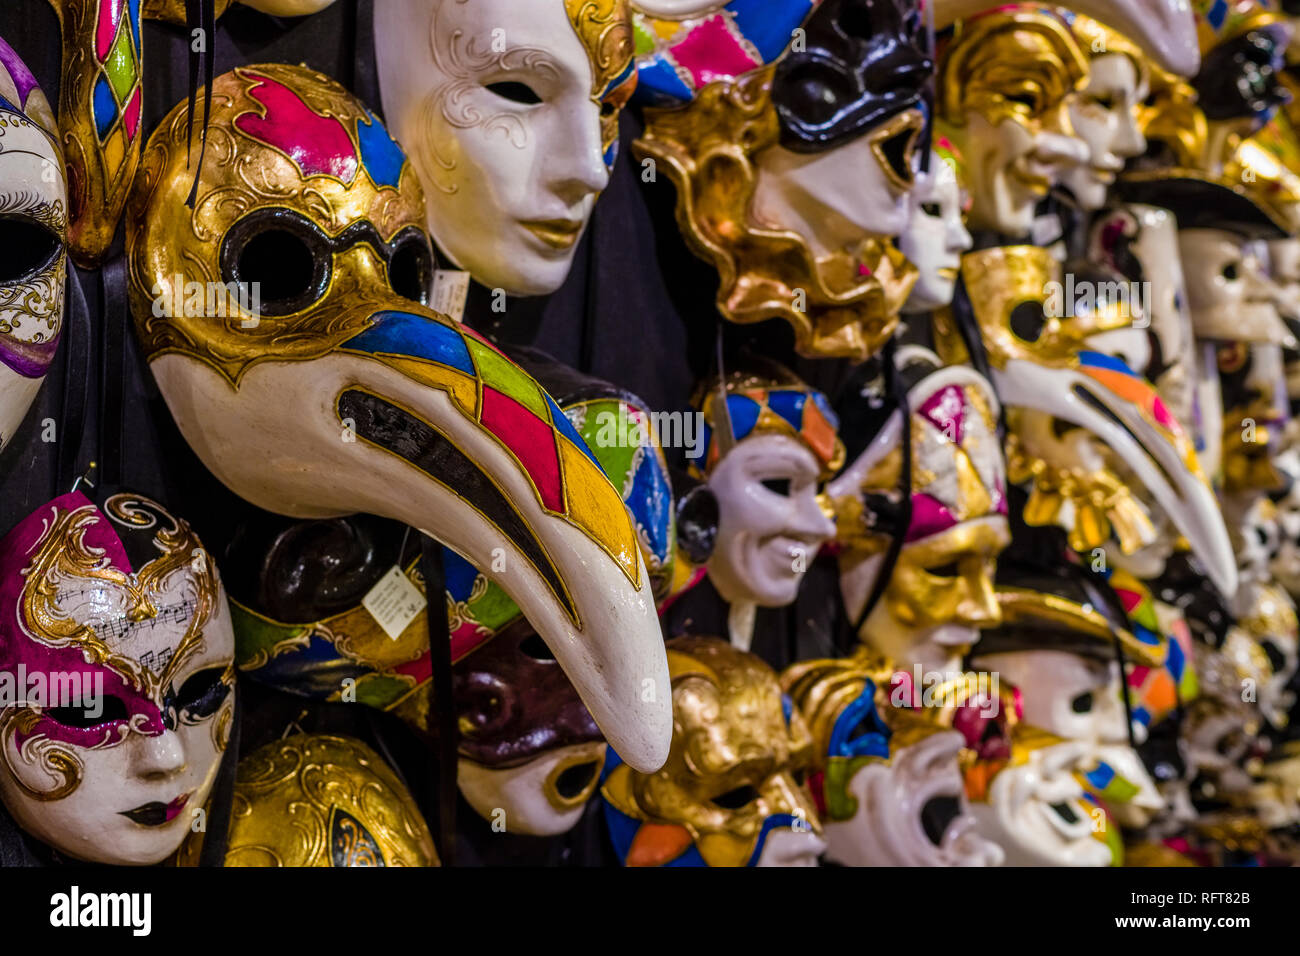 Artful and colorful masks for the Carnival of Venice, Carnevale di Venezia,  are displayed in a shop for sale Stock Photo - Alamy